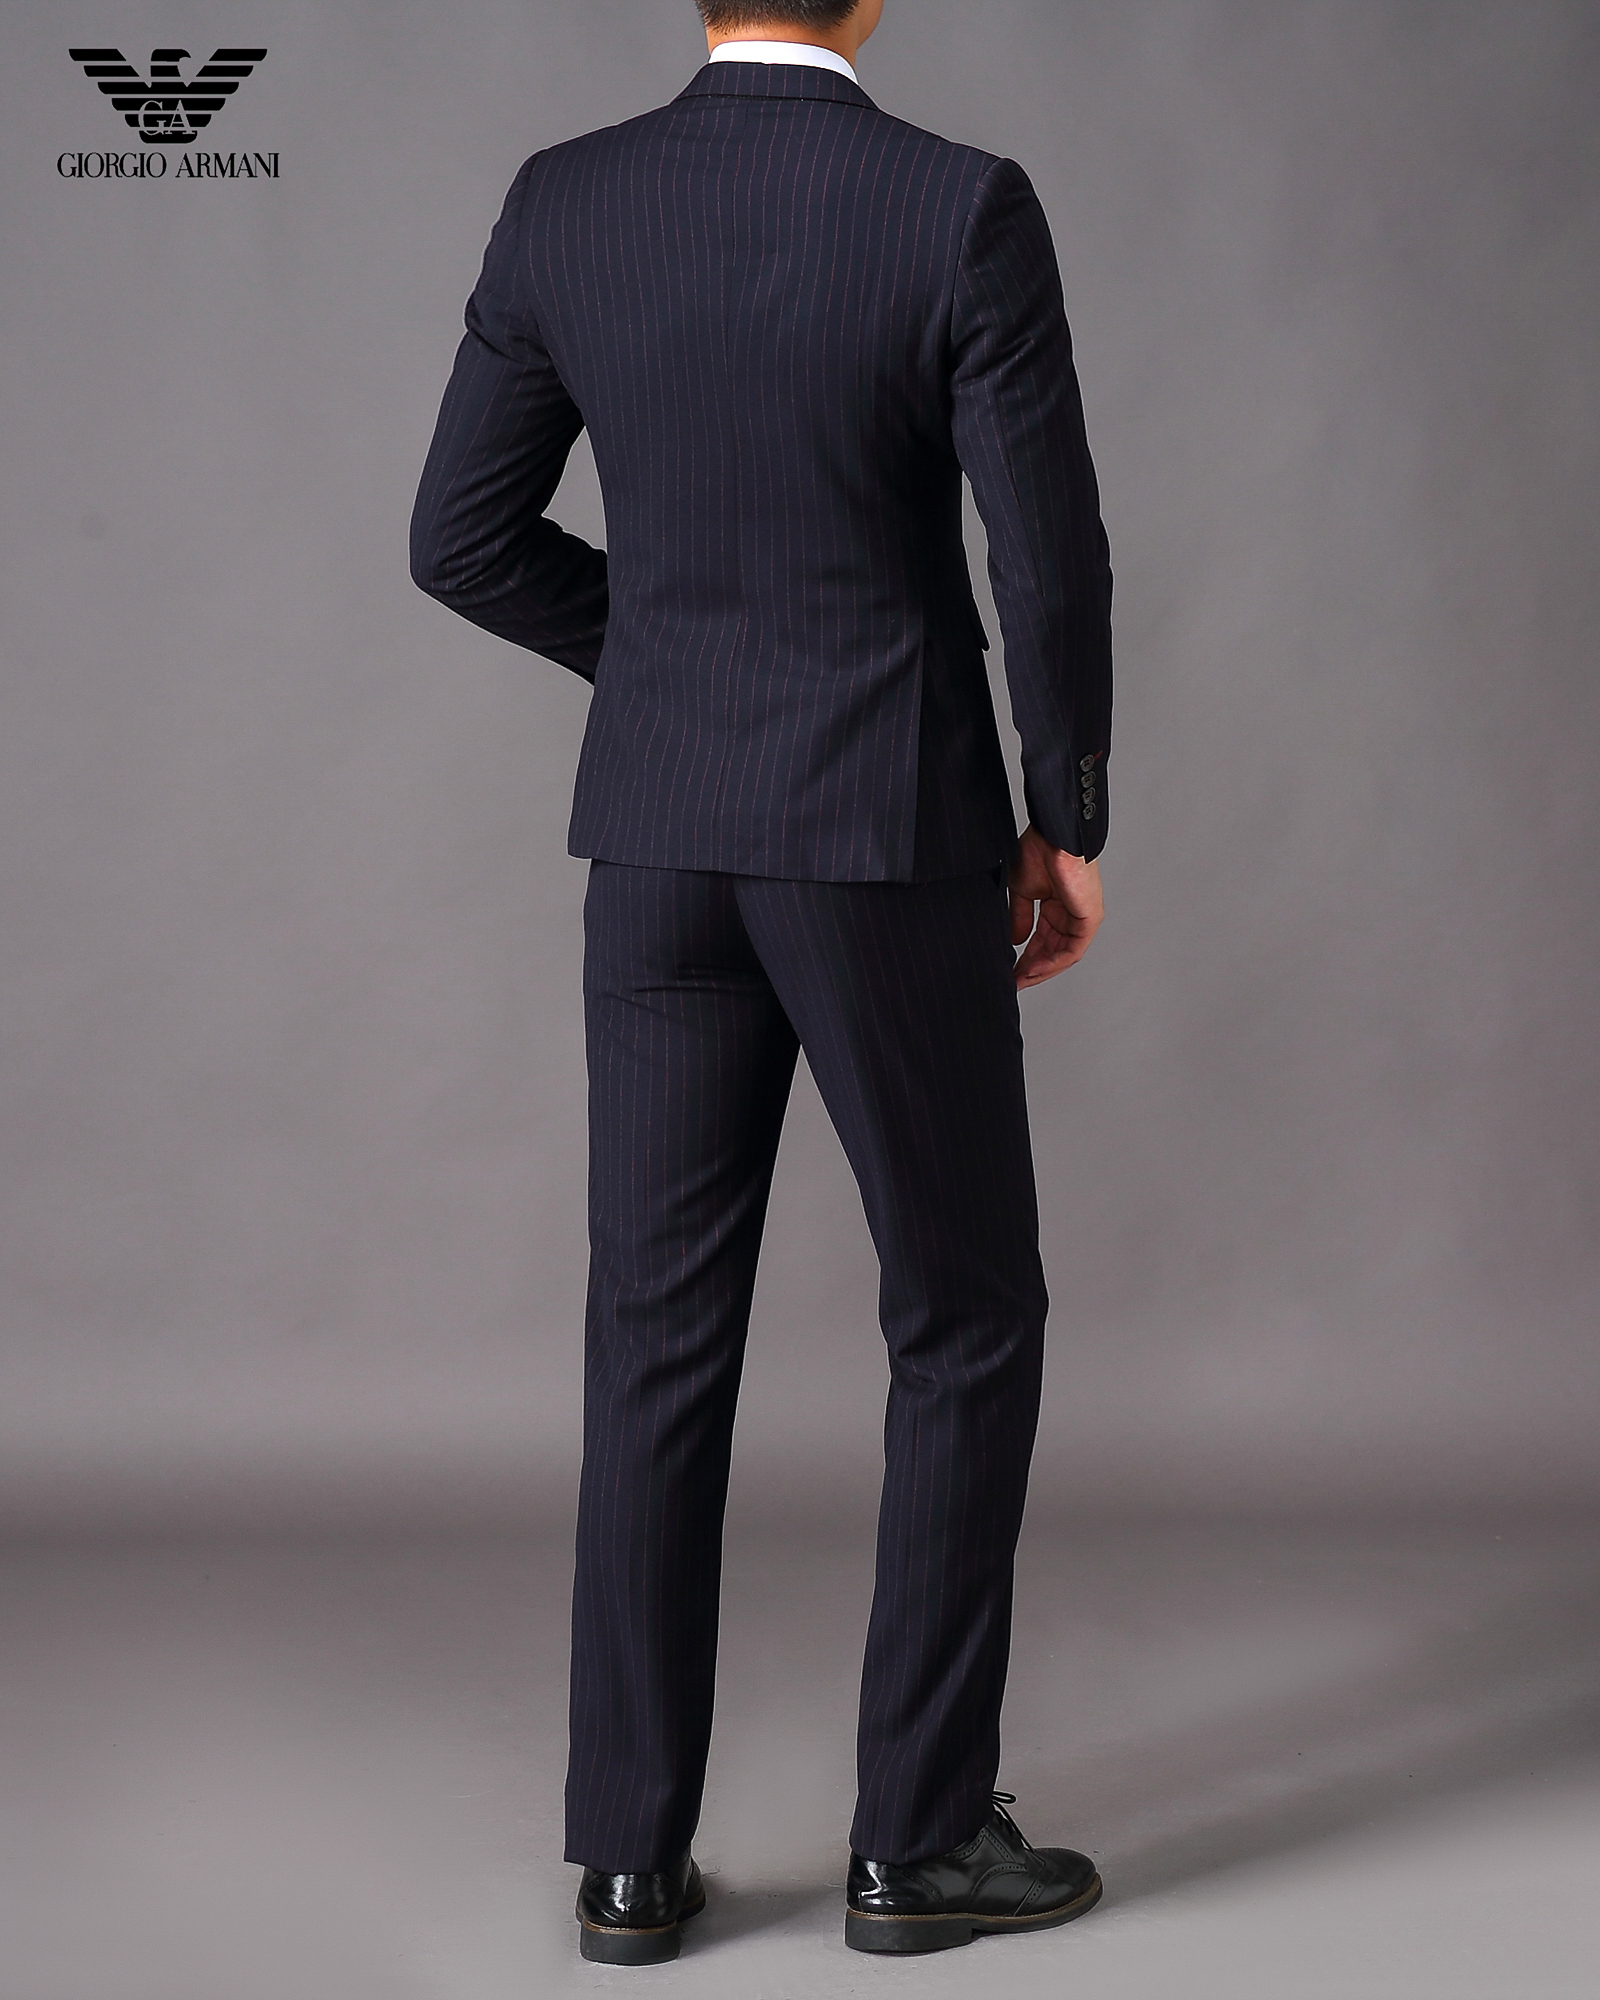 2020 Armani Suits For Men in 229997, cheap Giorgio Armani Suits, only $110!